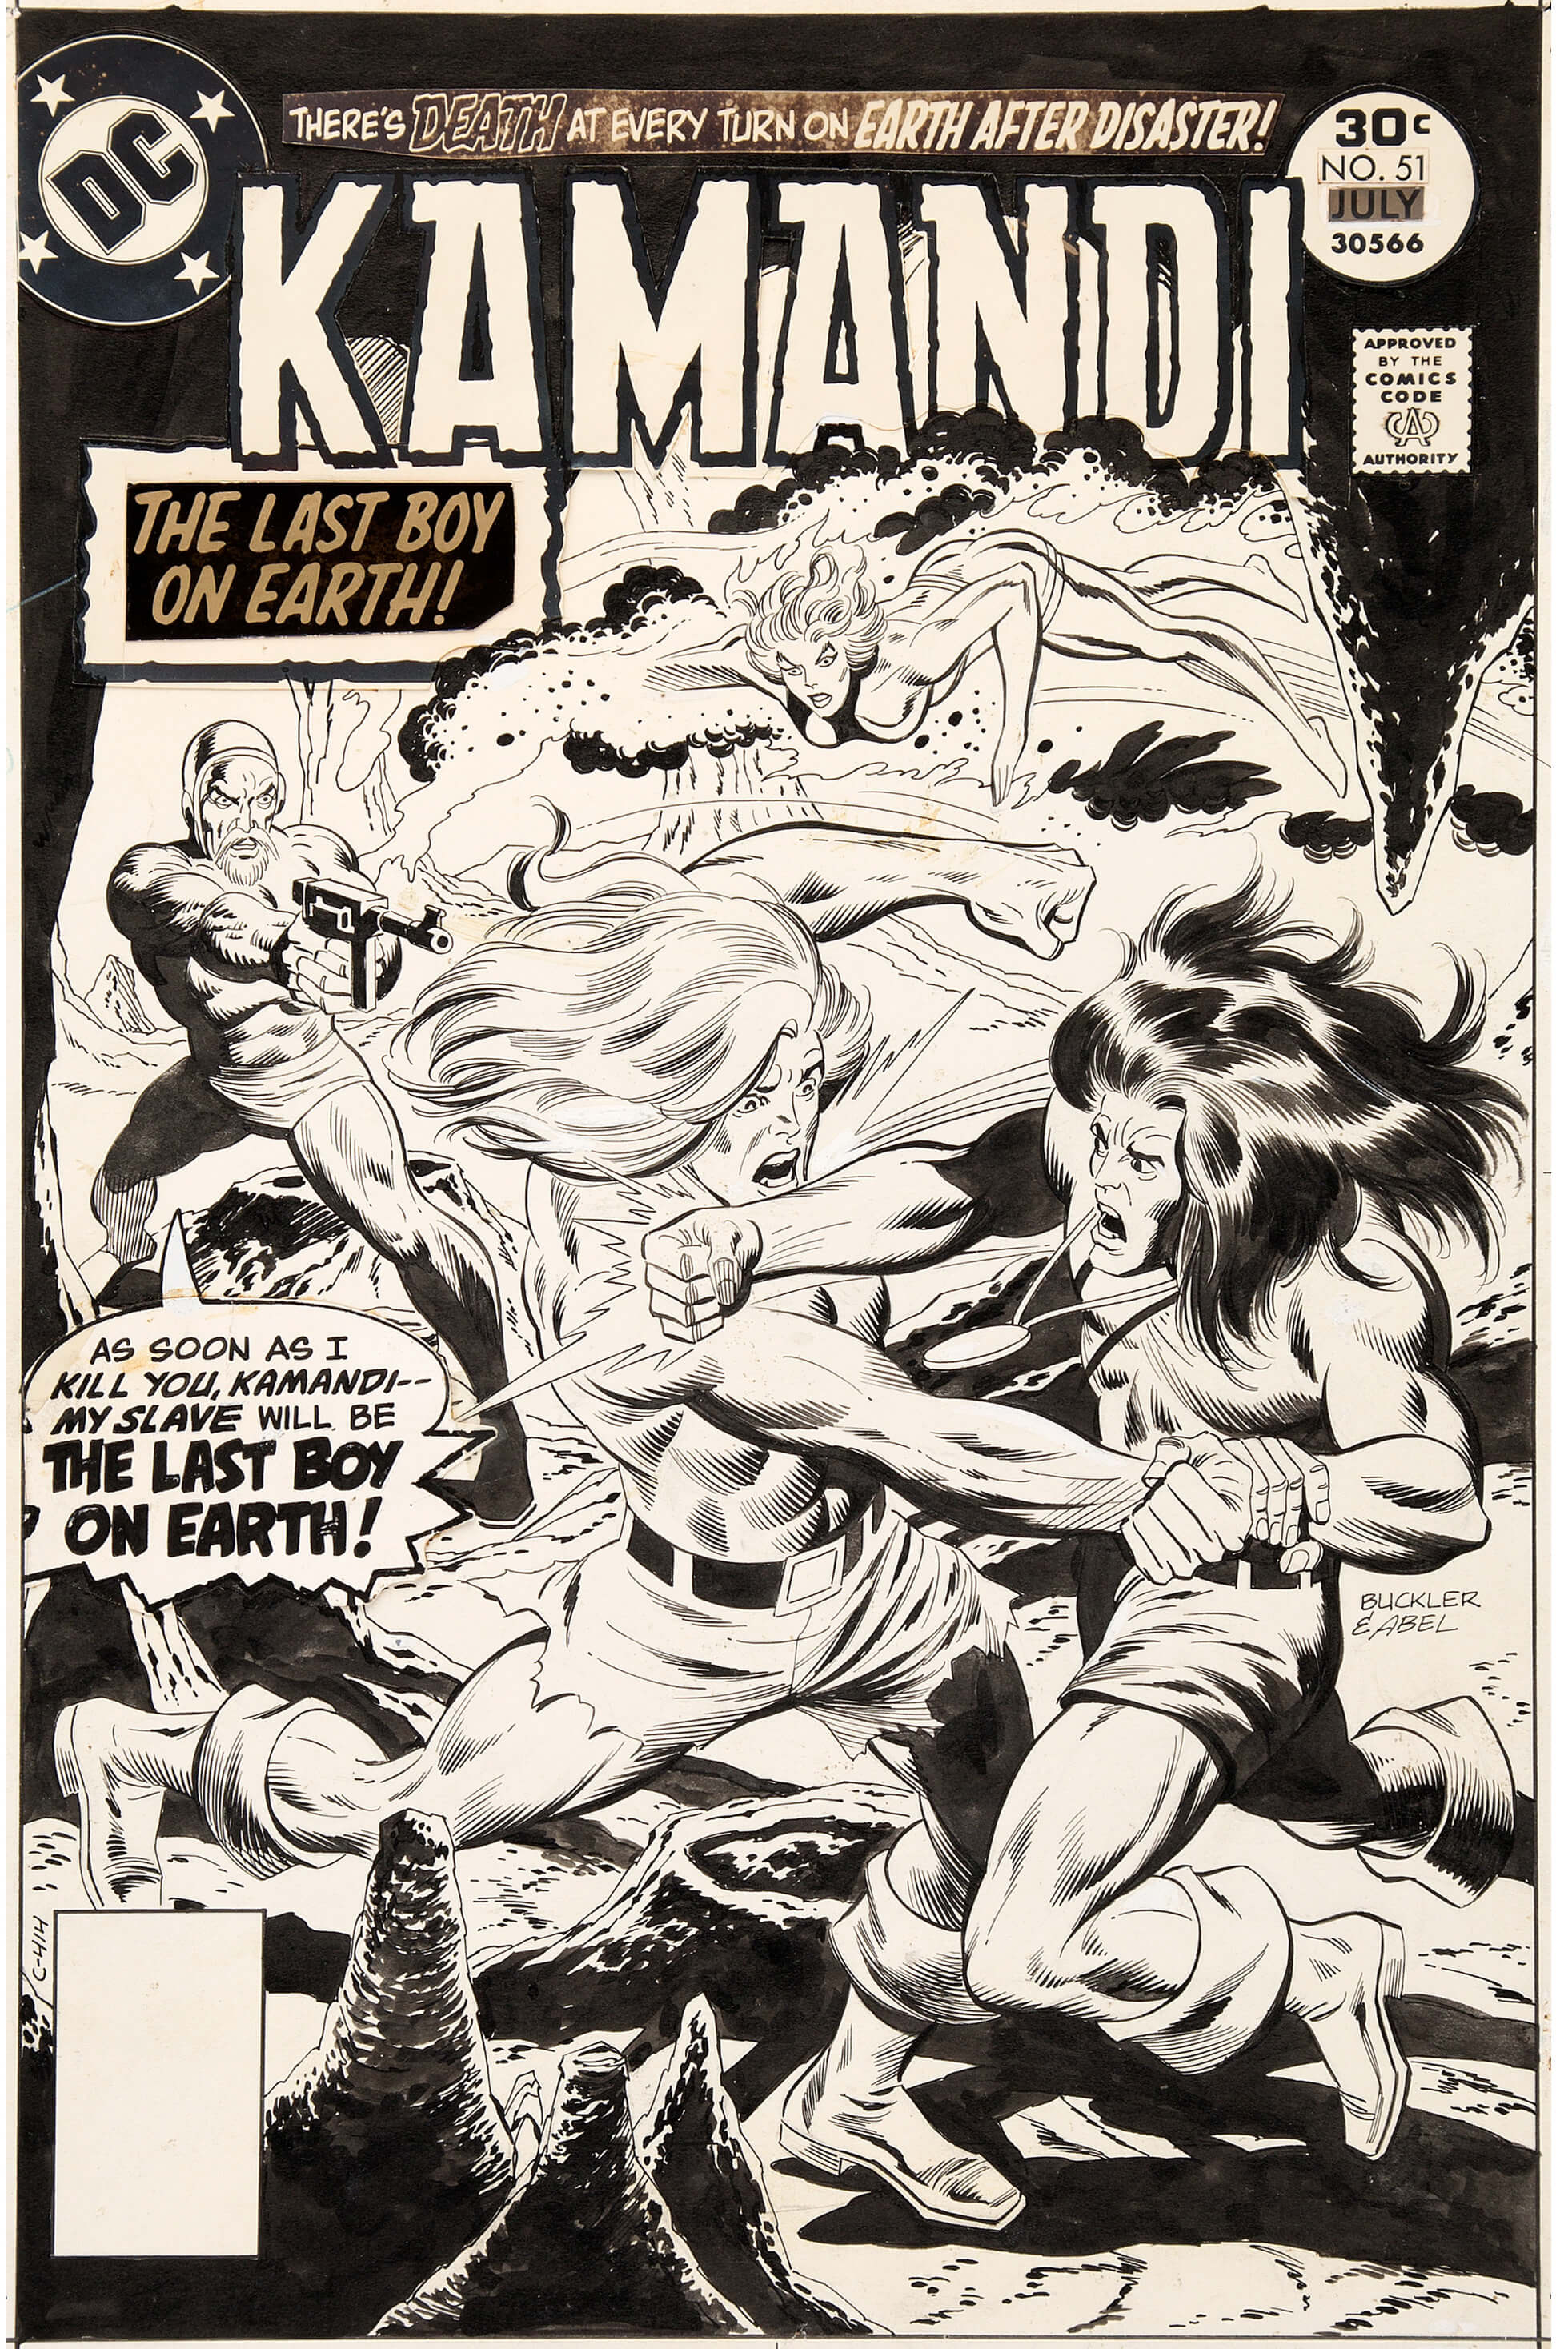 Rich Buckler and Jack Abel Kamandi, the Last Boy on Earth #51 cover